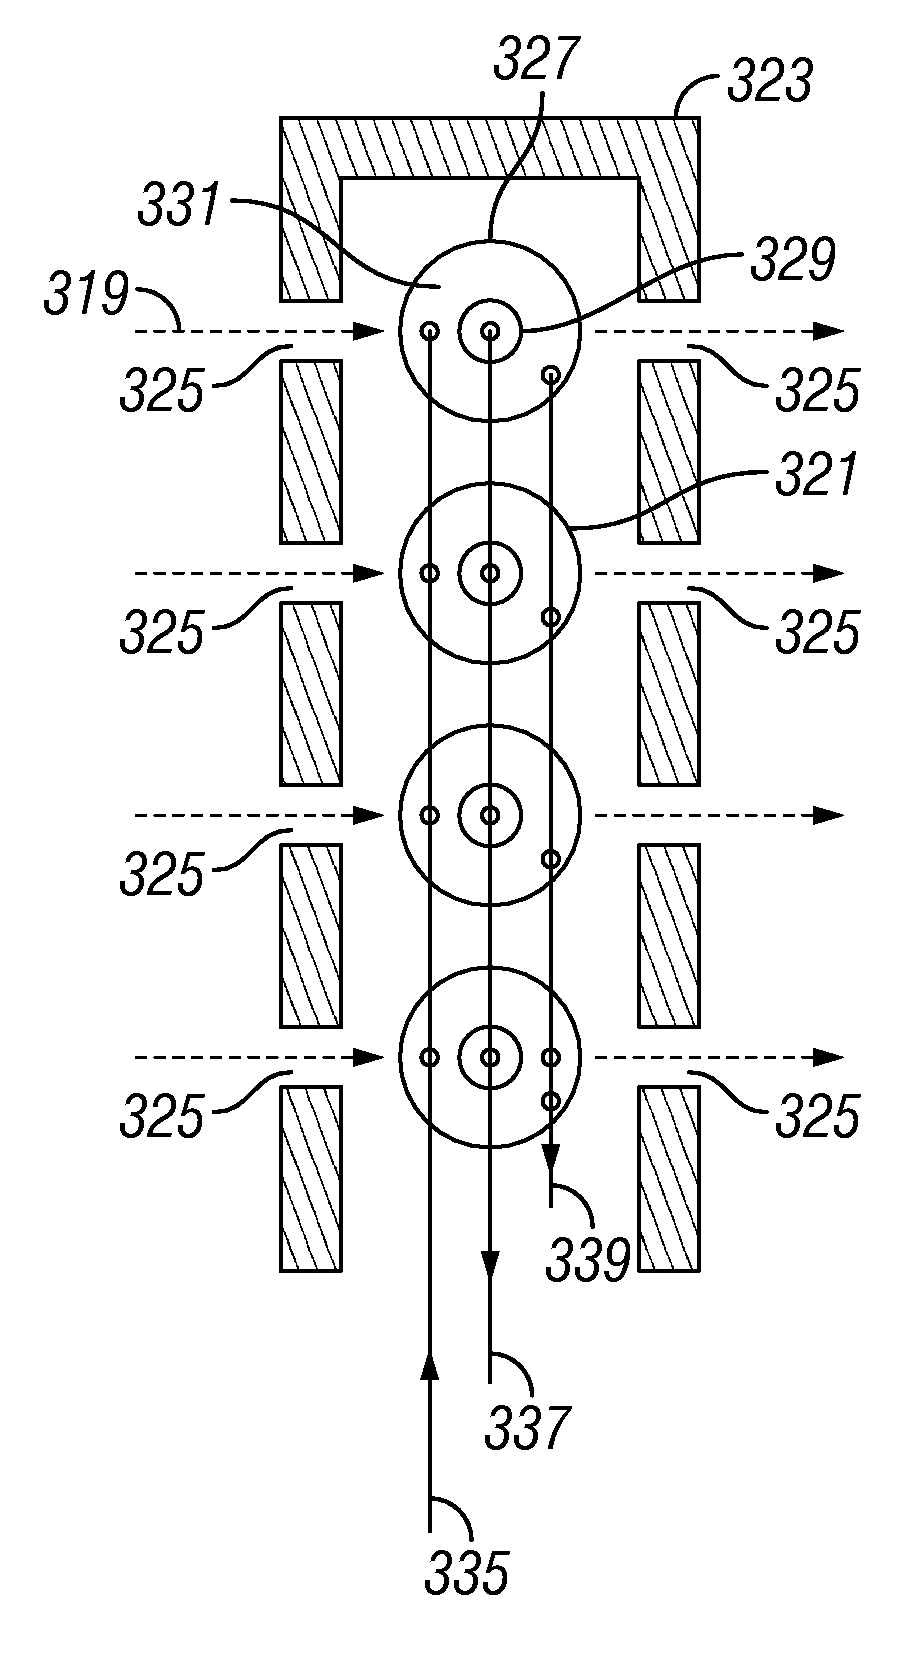 System and process for making hydrogen from a hydrocarbon stream